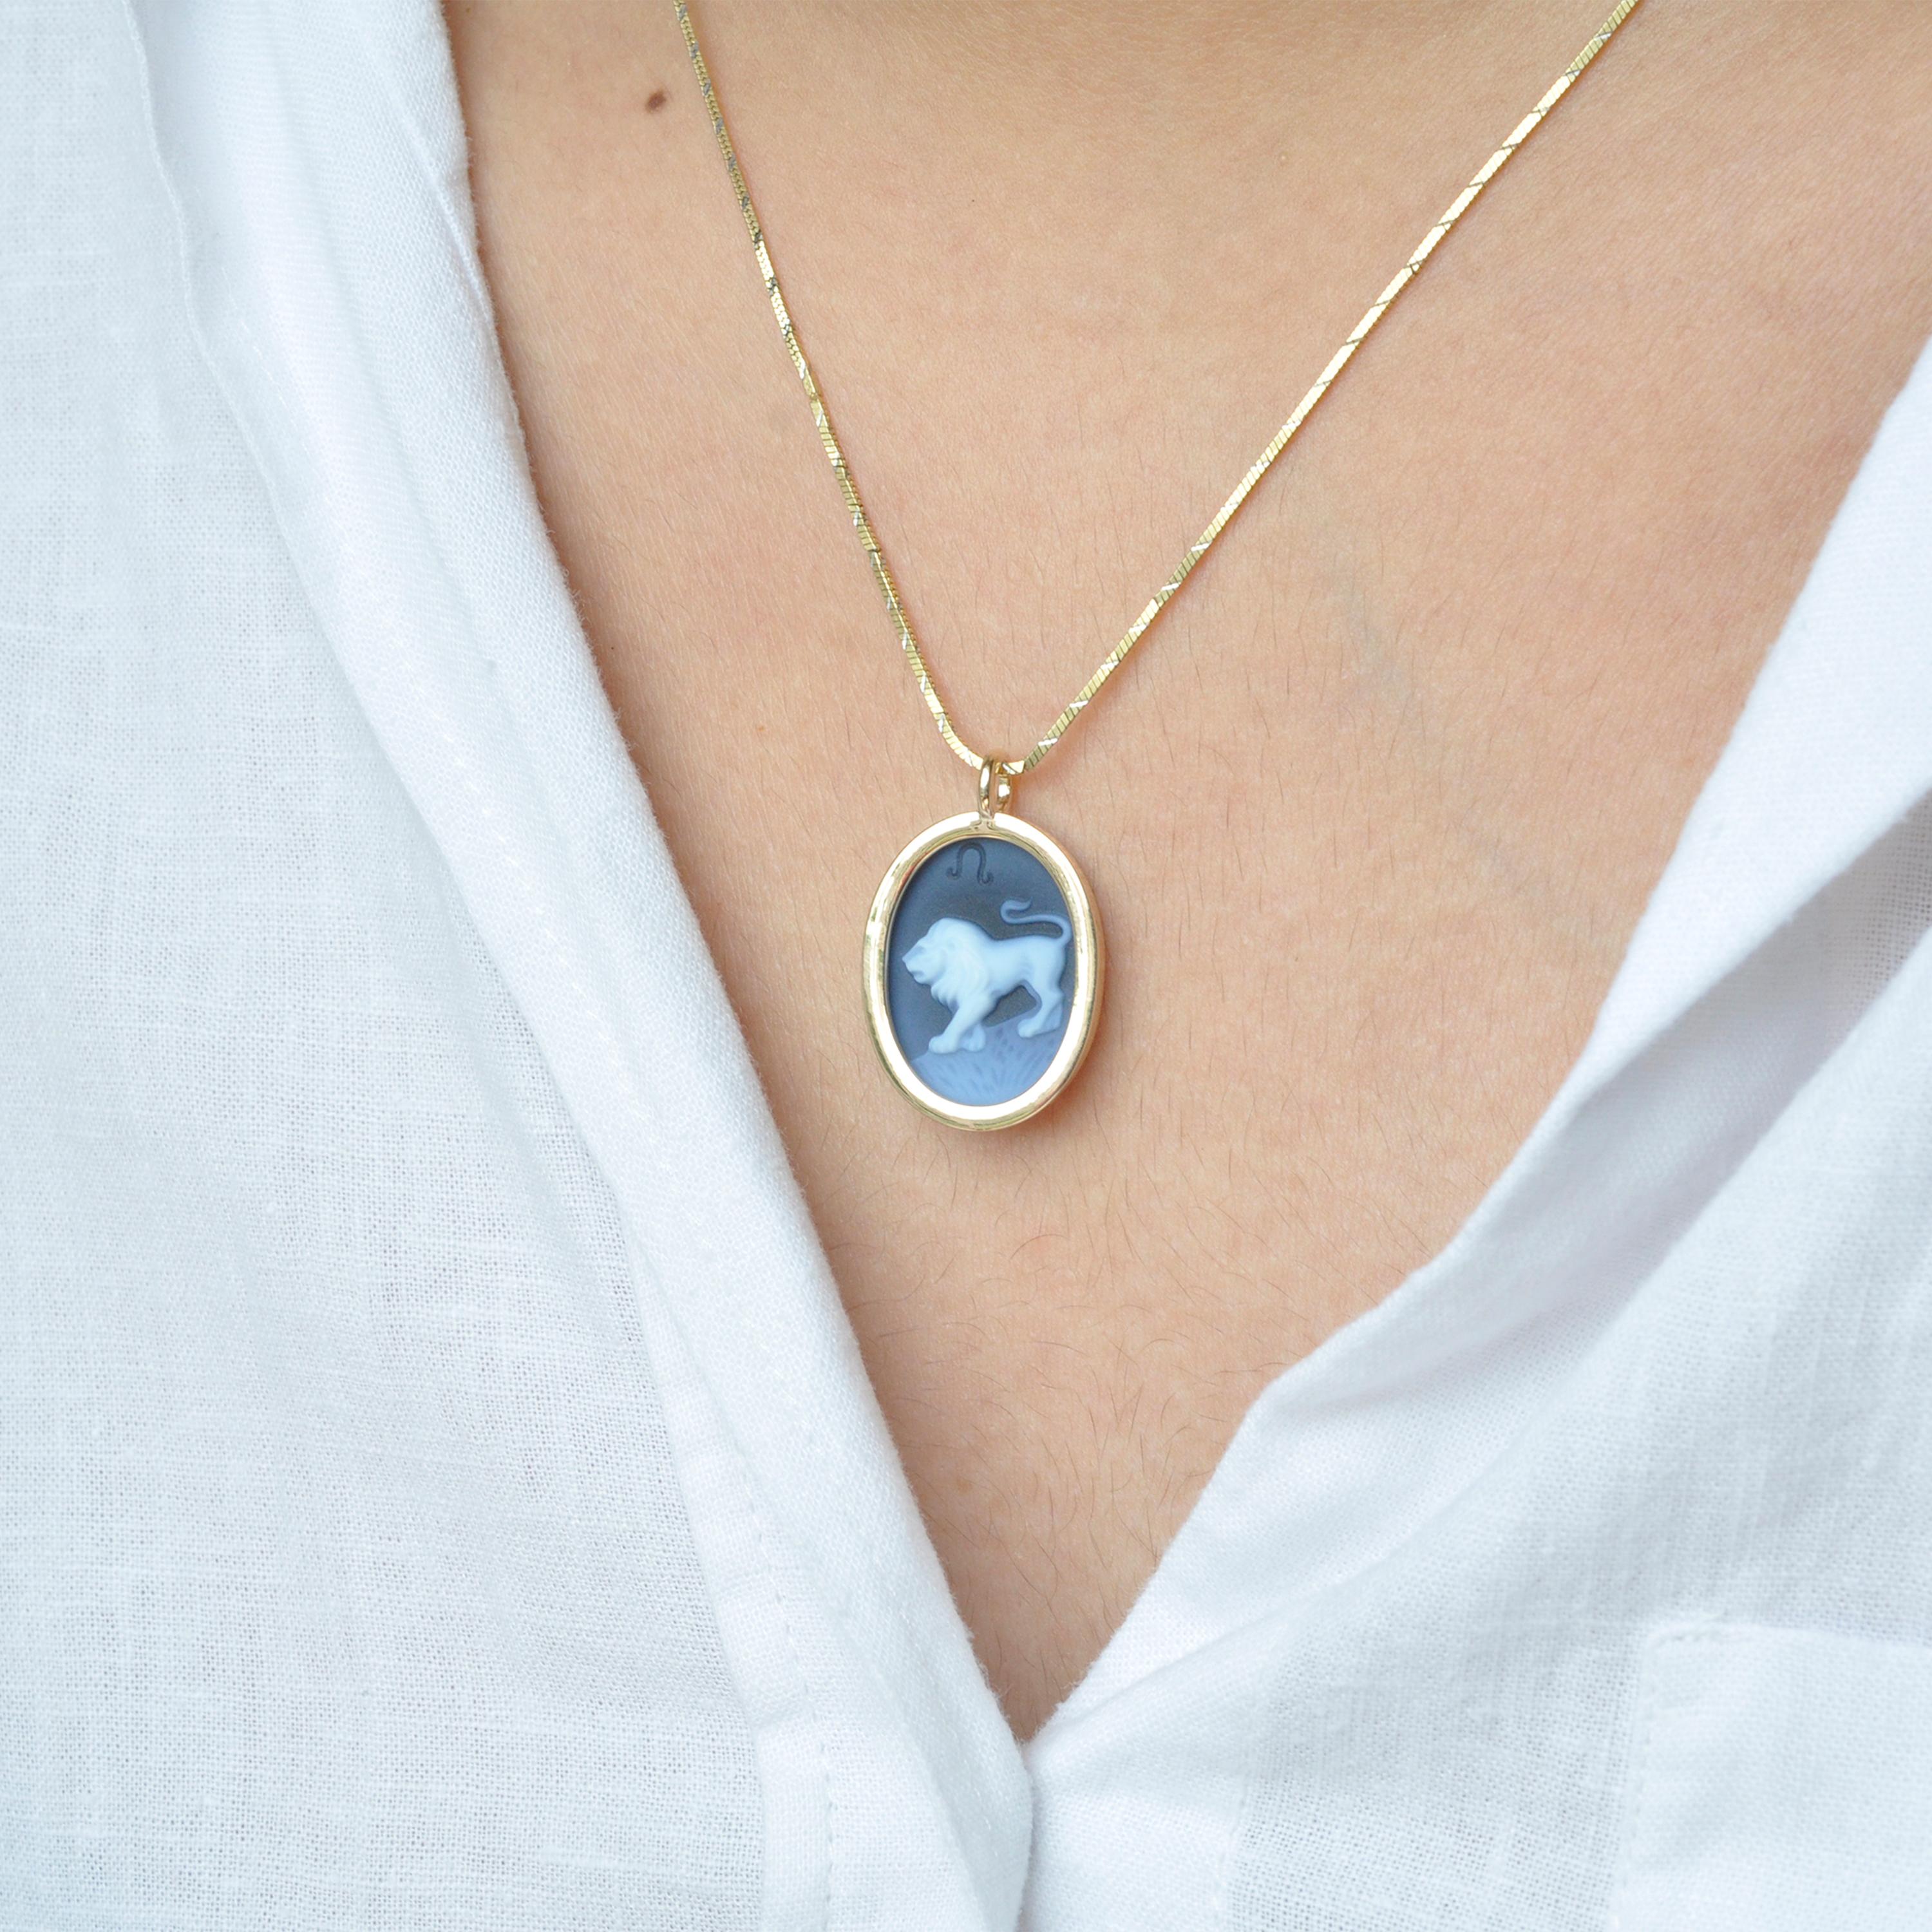 The reversible pendant necklace featuring a Leo sun sign carving cameo zodiac diamond in 14 karat gold is a remarkable piece of jewelry that combines elegance, craftsmanship, and personalization. It offers two distinct looks in one, allowing you to